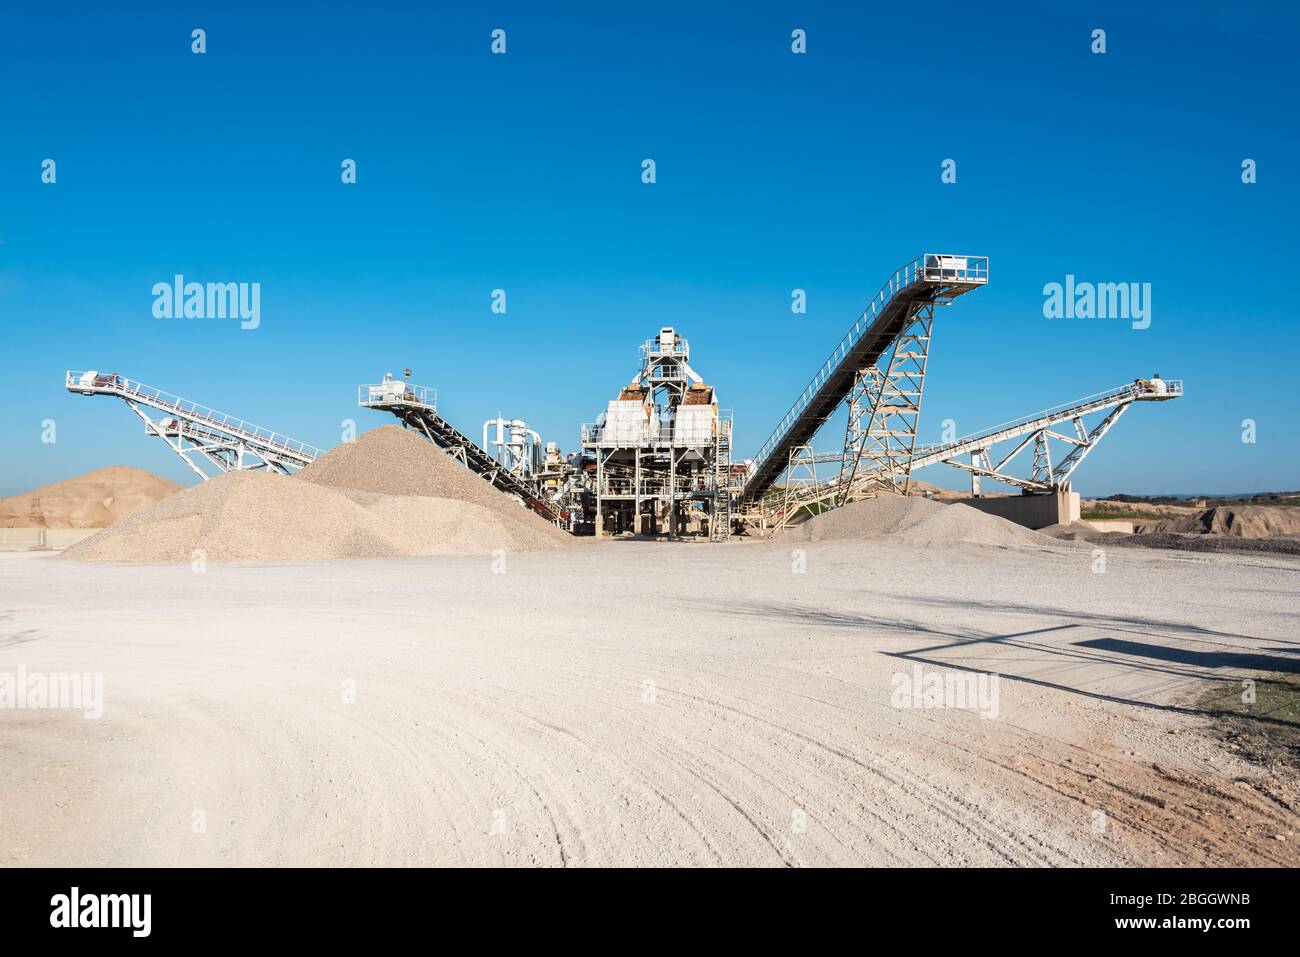 February 19, 2020 - Belianes-Preixana, Spain. A Gravel pit with heavy machinery on the edge of the SPA (Special protected area) Belianes-Preixana. Stock Photo